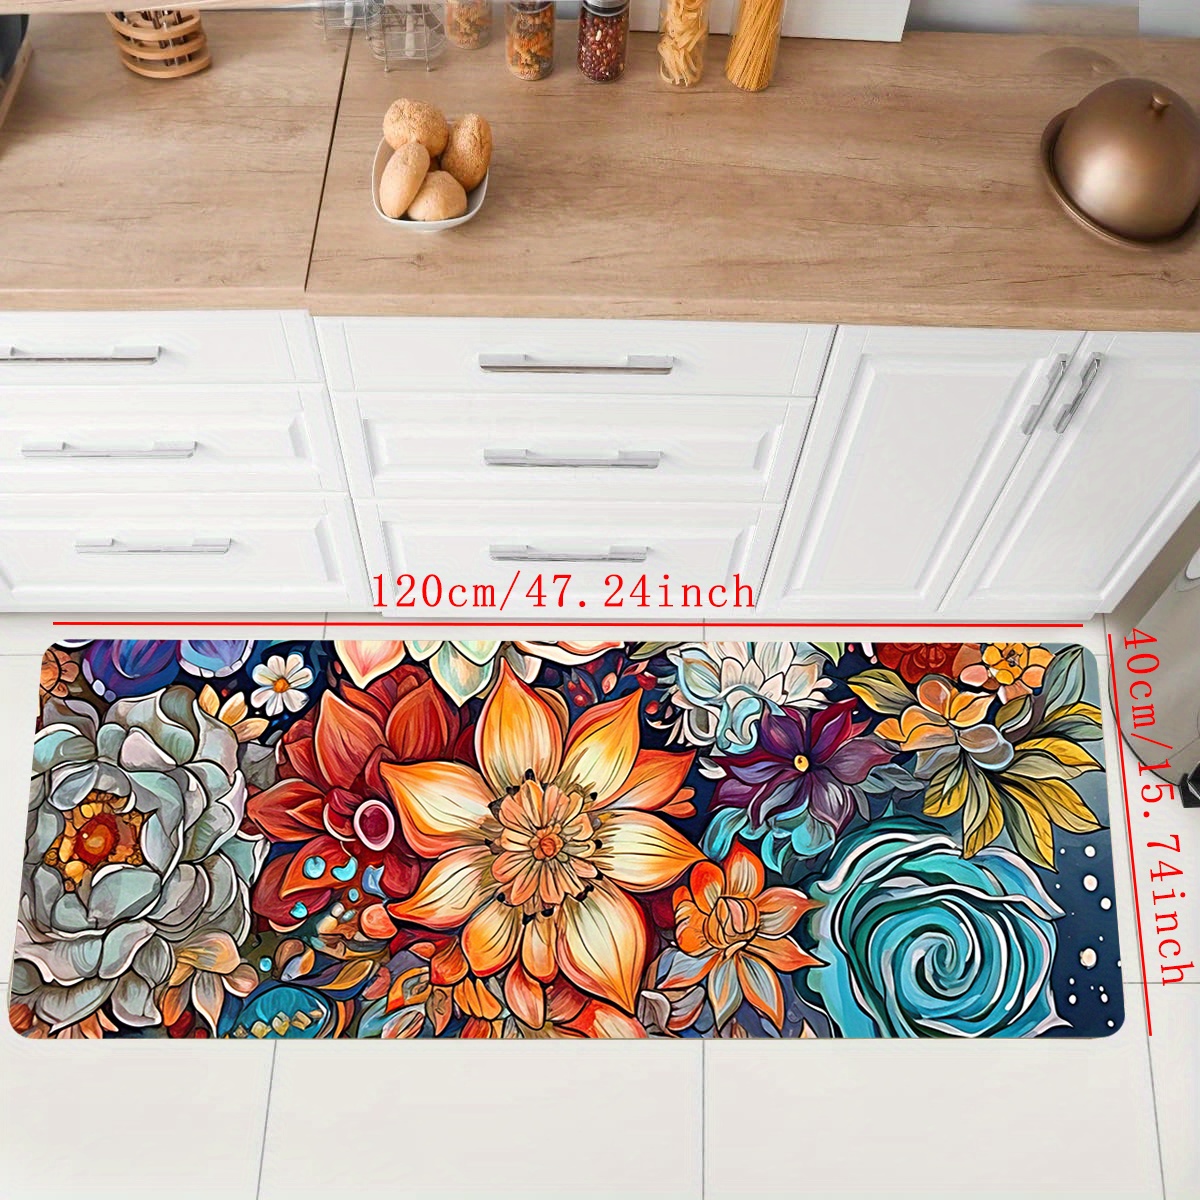 Blooming Flowers Coffee Mat Mat 24x18 Inch for Kitchen Counter